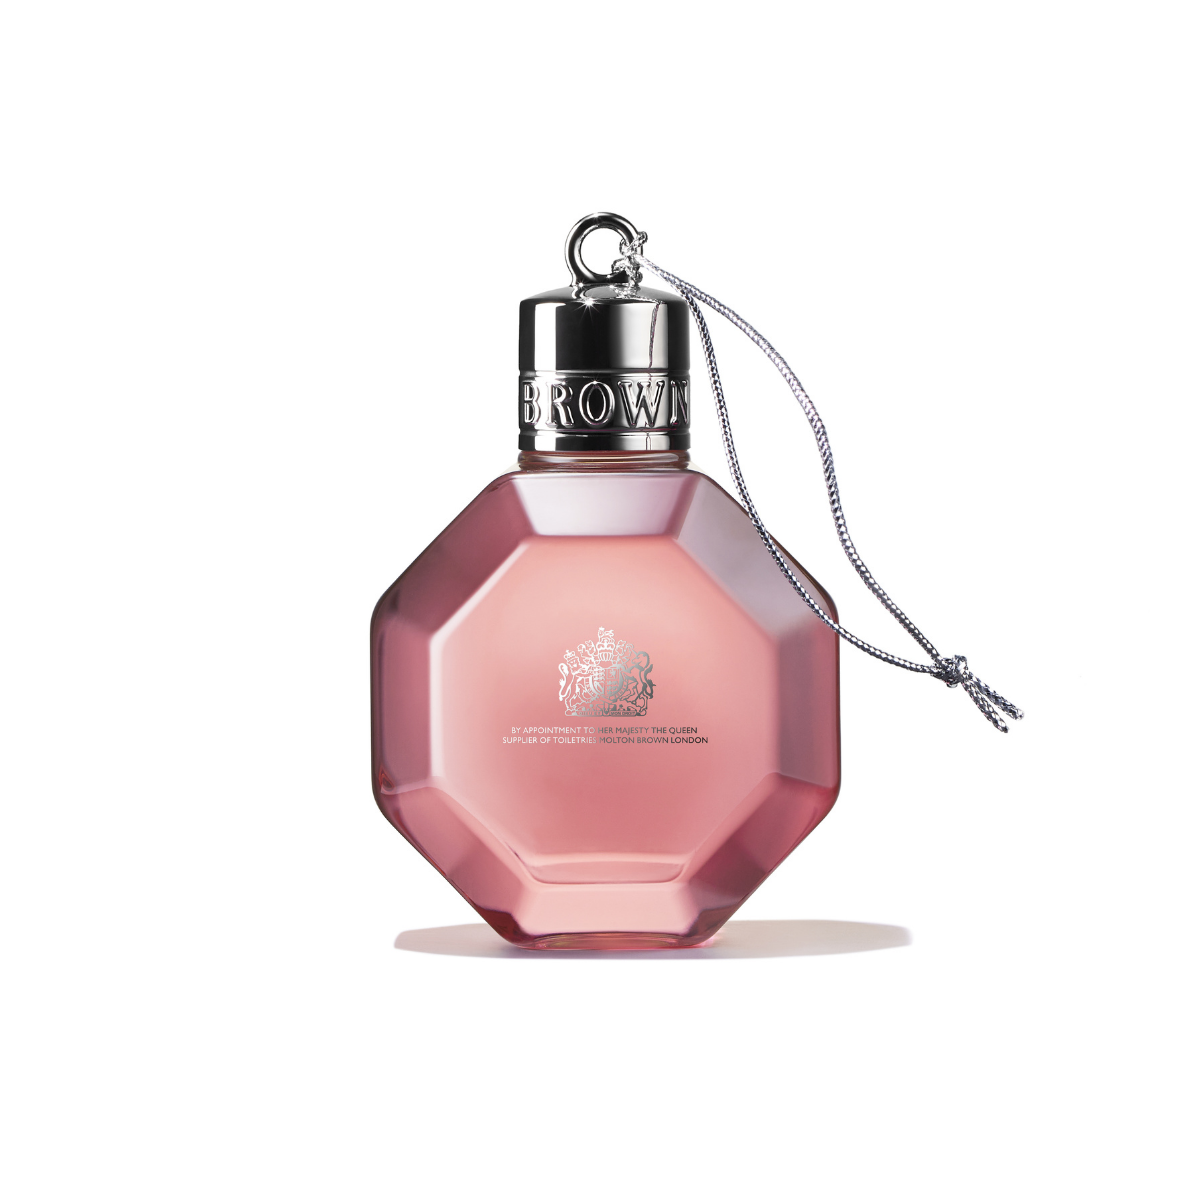 Molton Brown Delicious Rhubarb & Rose Festive Bauble.